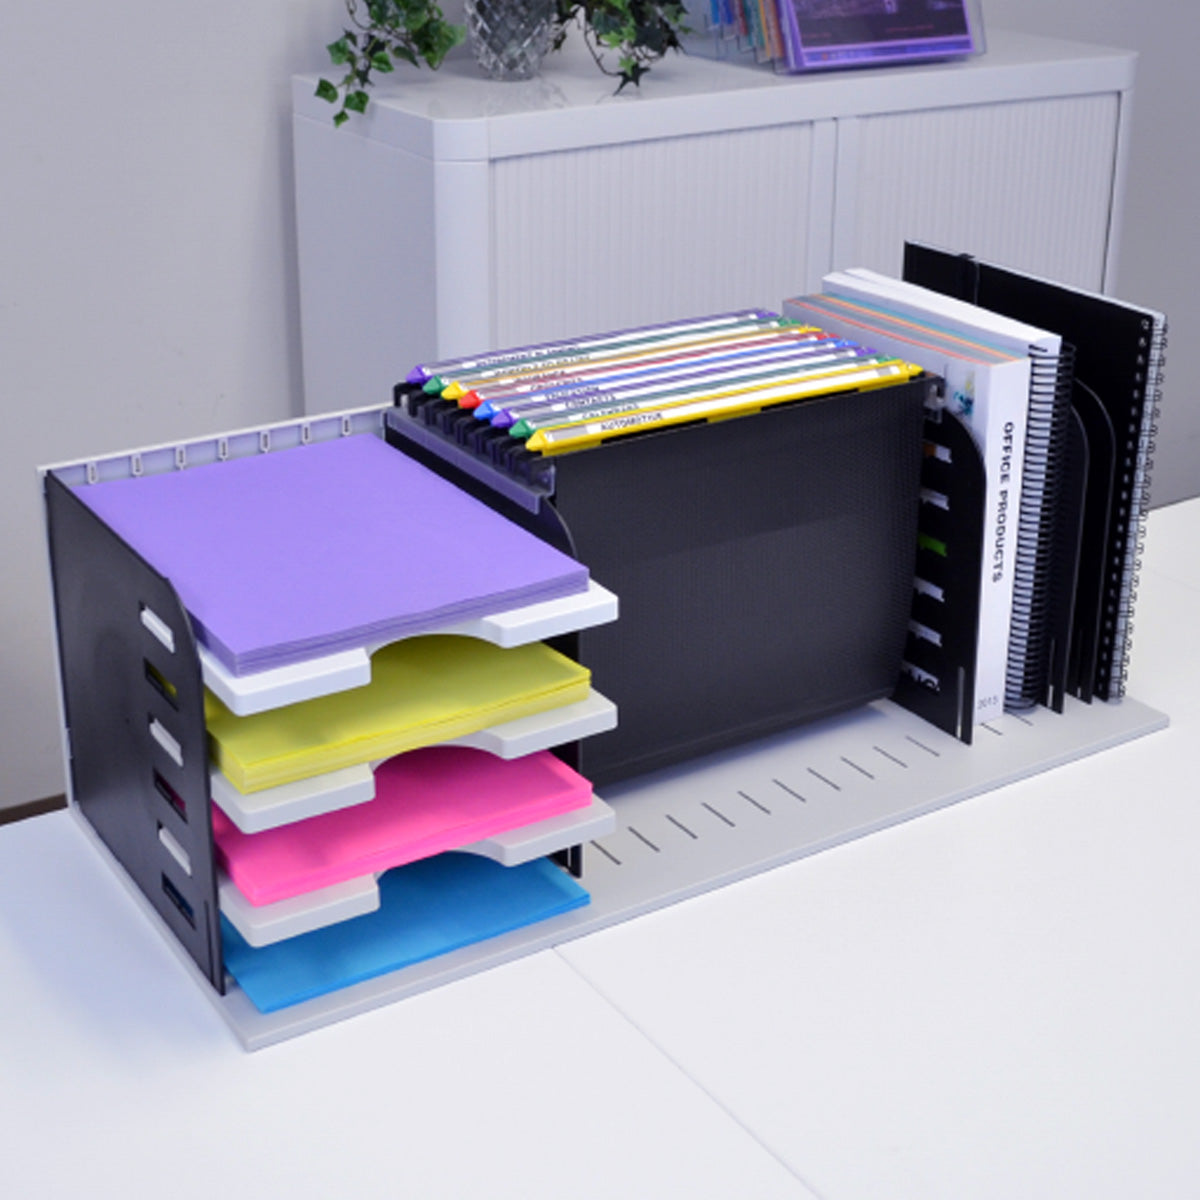 This Bestselling Organizer Is an Instant Fix for Cluttered